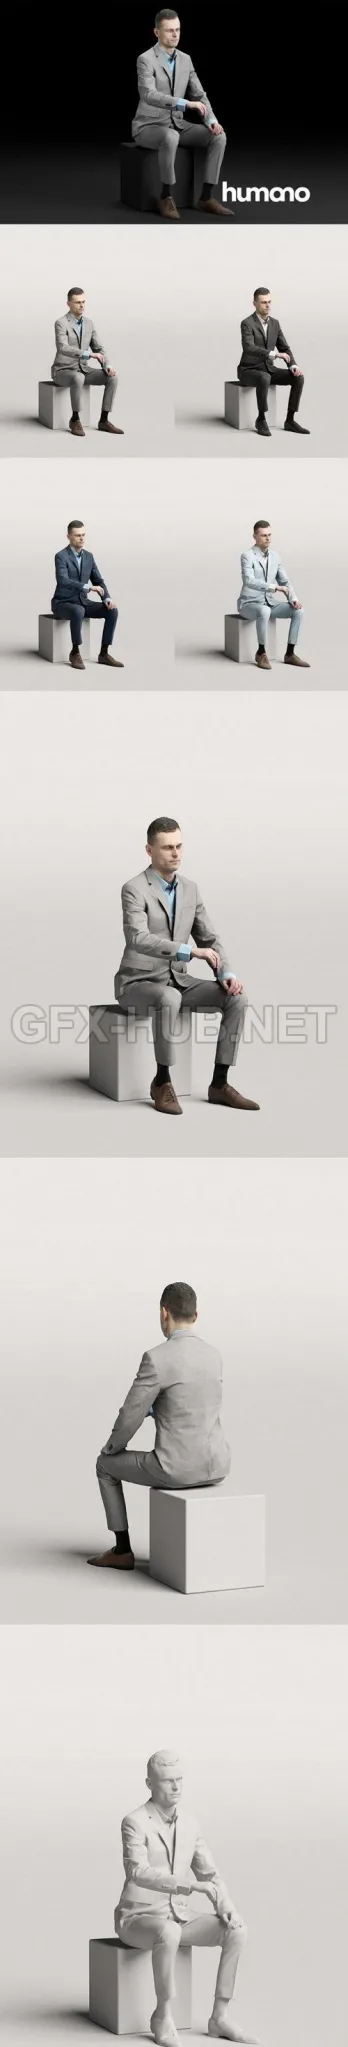 PBR Game 3D Model – Humano Elegant business man sitting and typing 0117